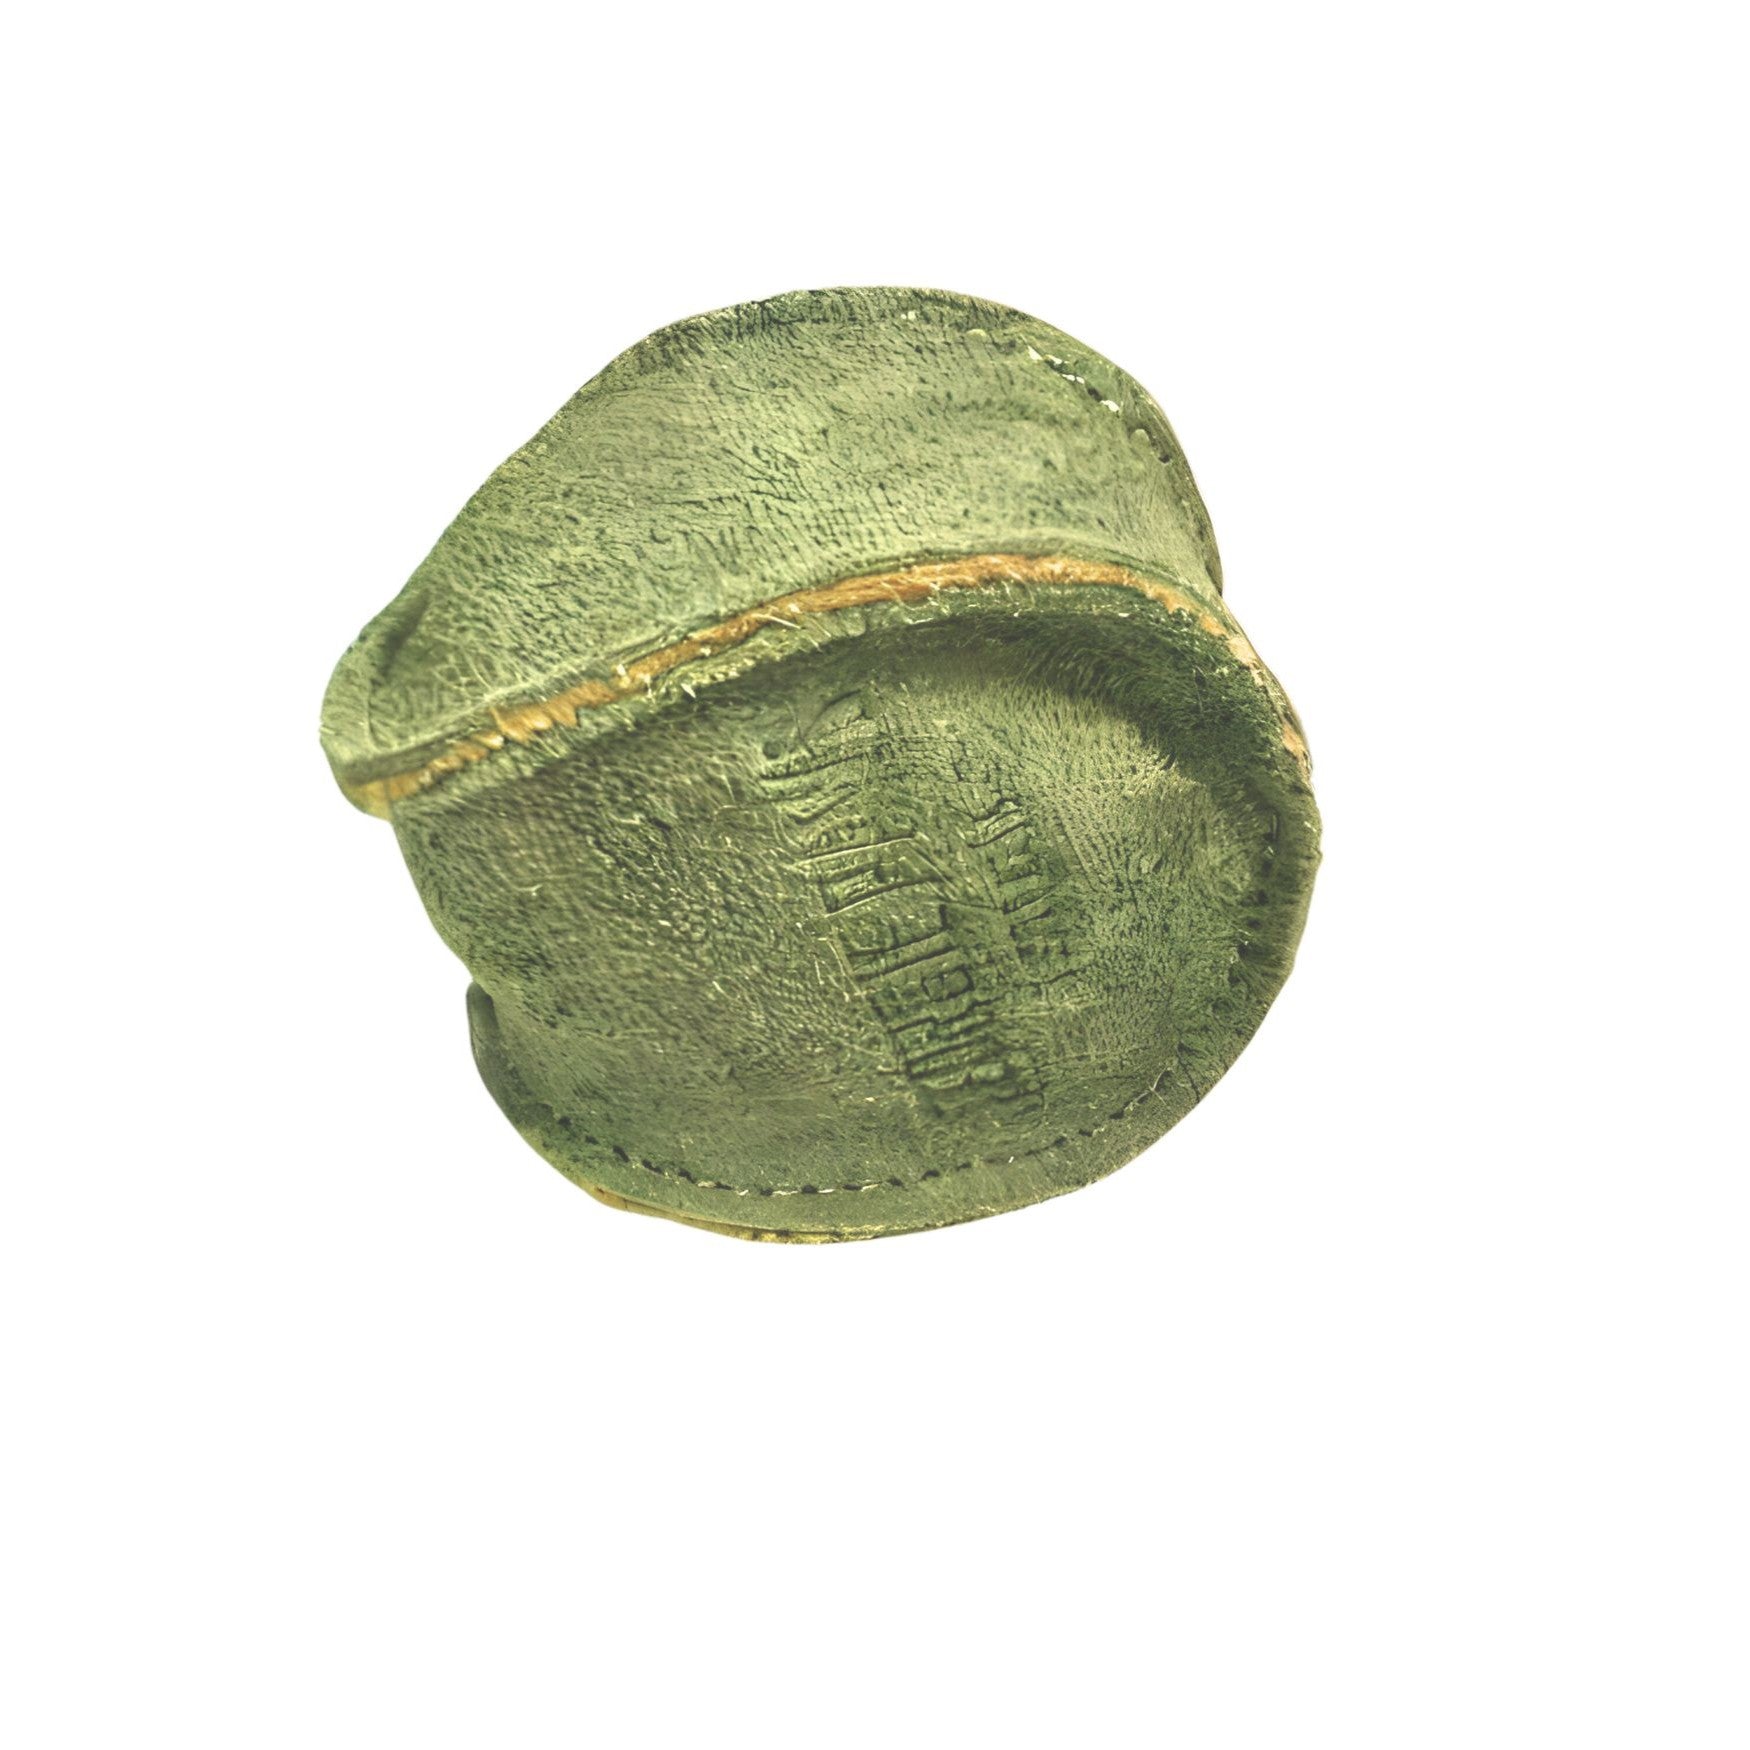 A worn, olive green military beret with visible stitching and a Georgie Paws Grass dog ball embossed on the sweatband, displayed against a white background.